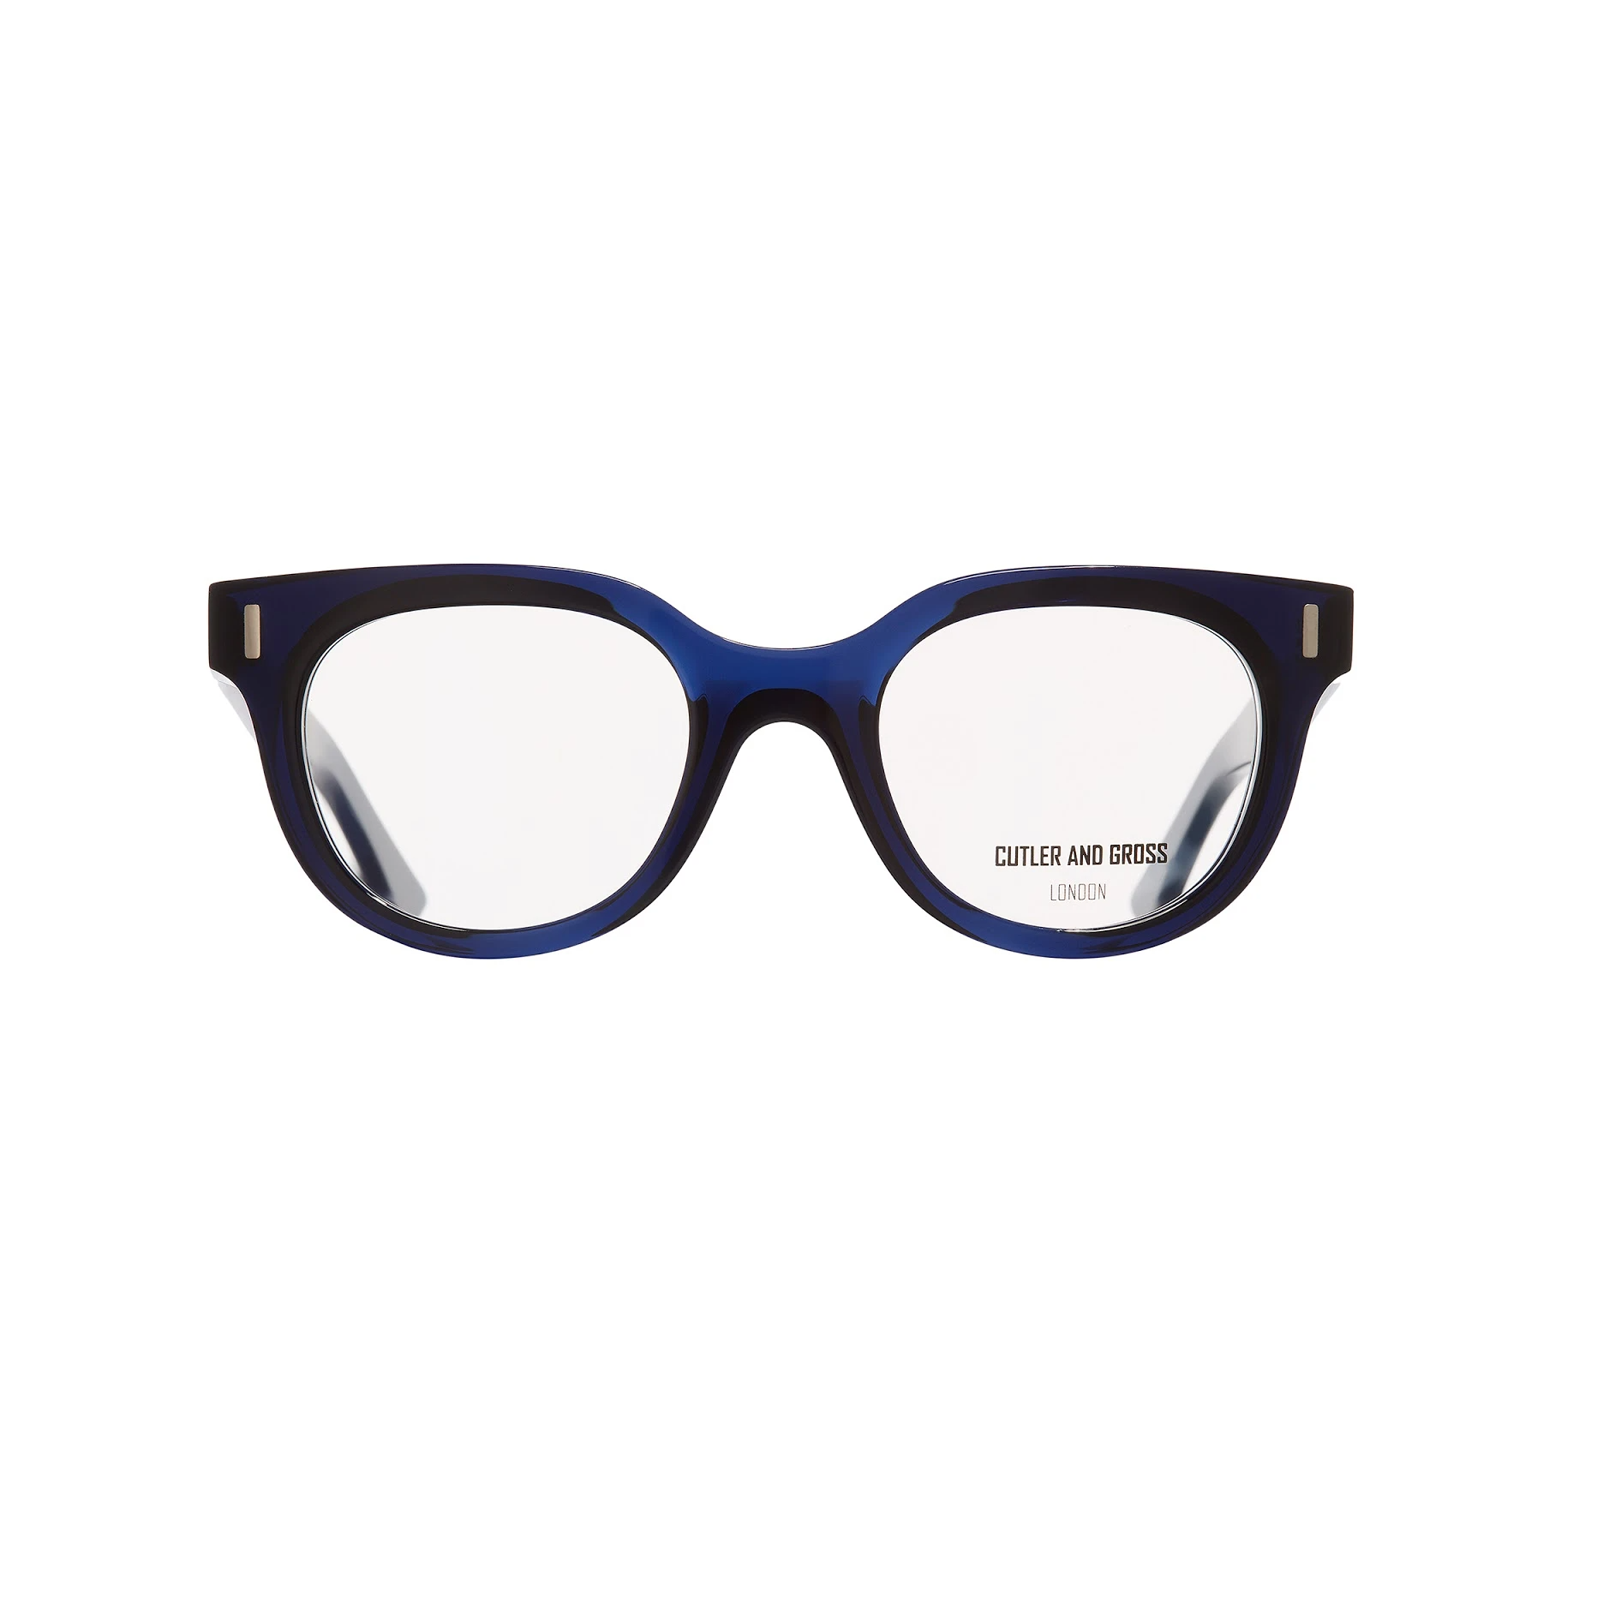 Cutler and Gross, 1304 Optical Round Glasses - Classic Navy